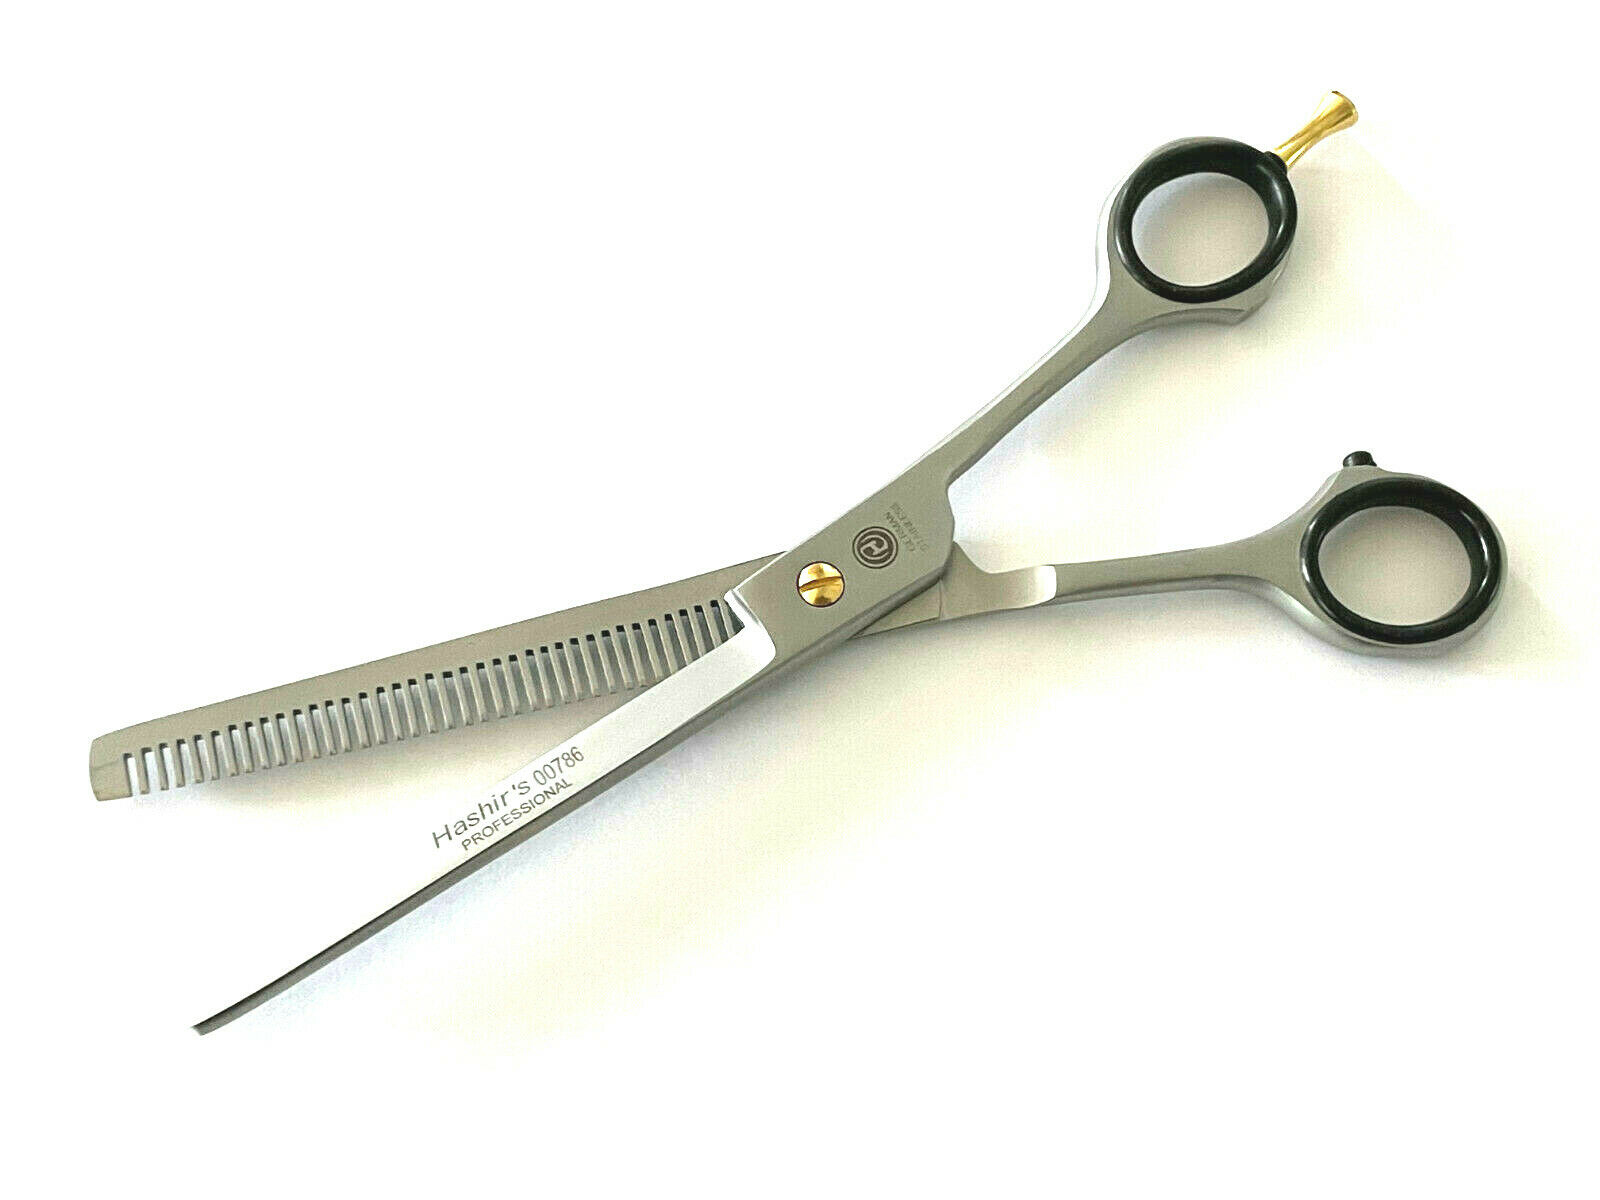 Single Teeth Hair Trimming - Perfect for Household Use, Barbershops